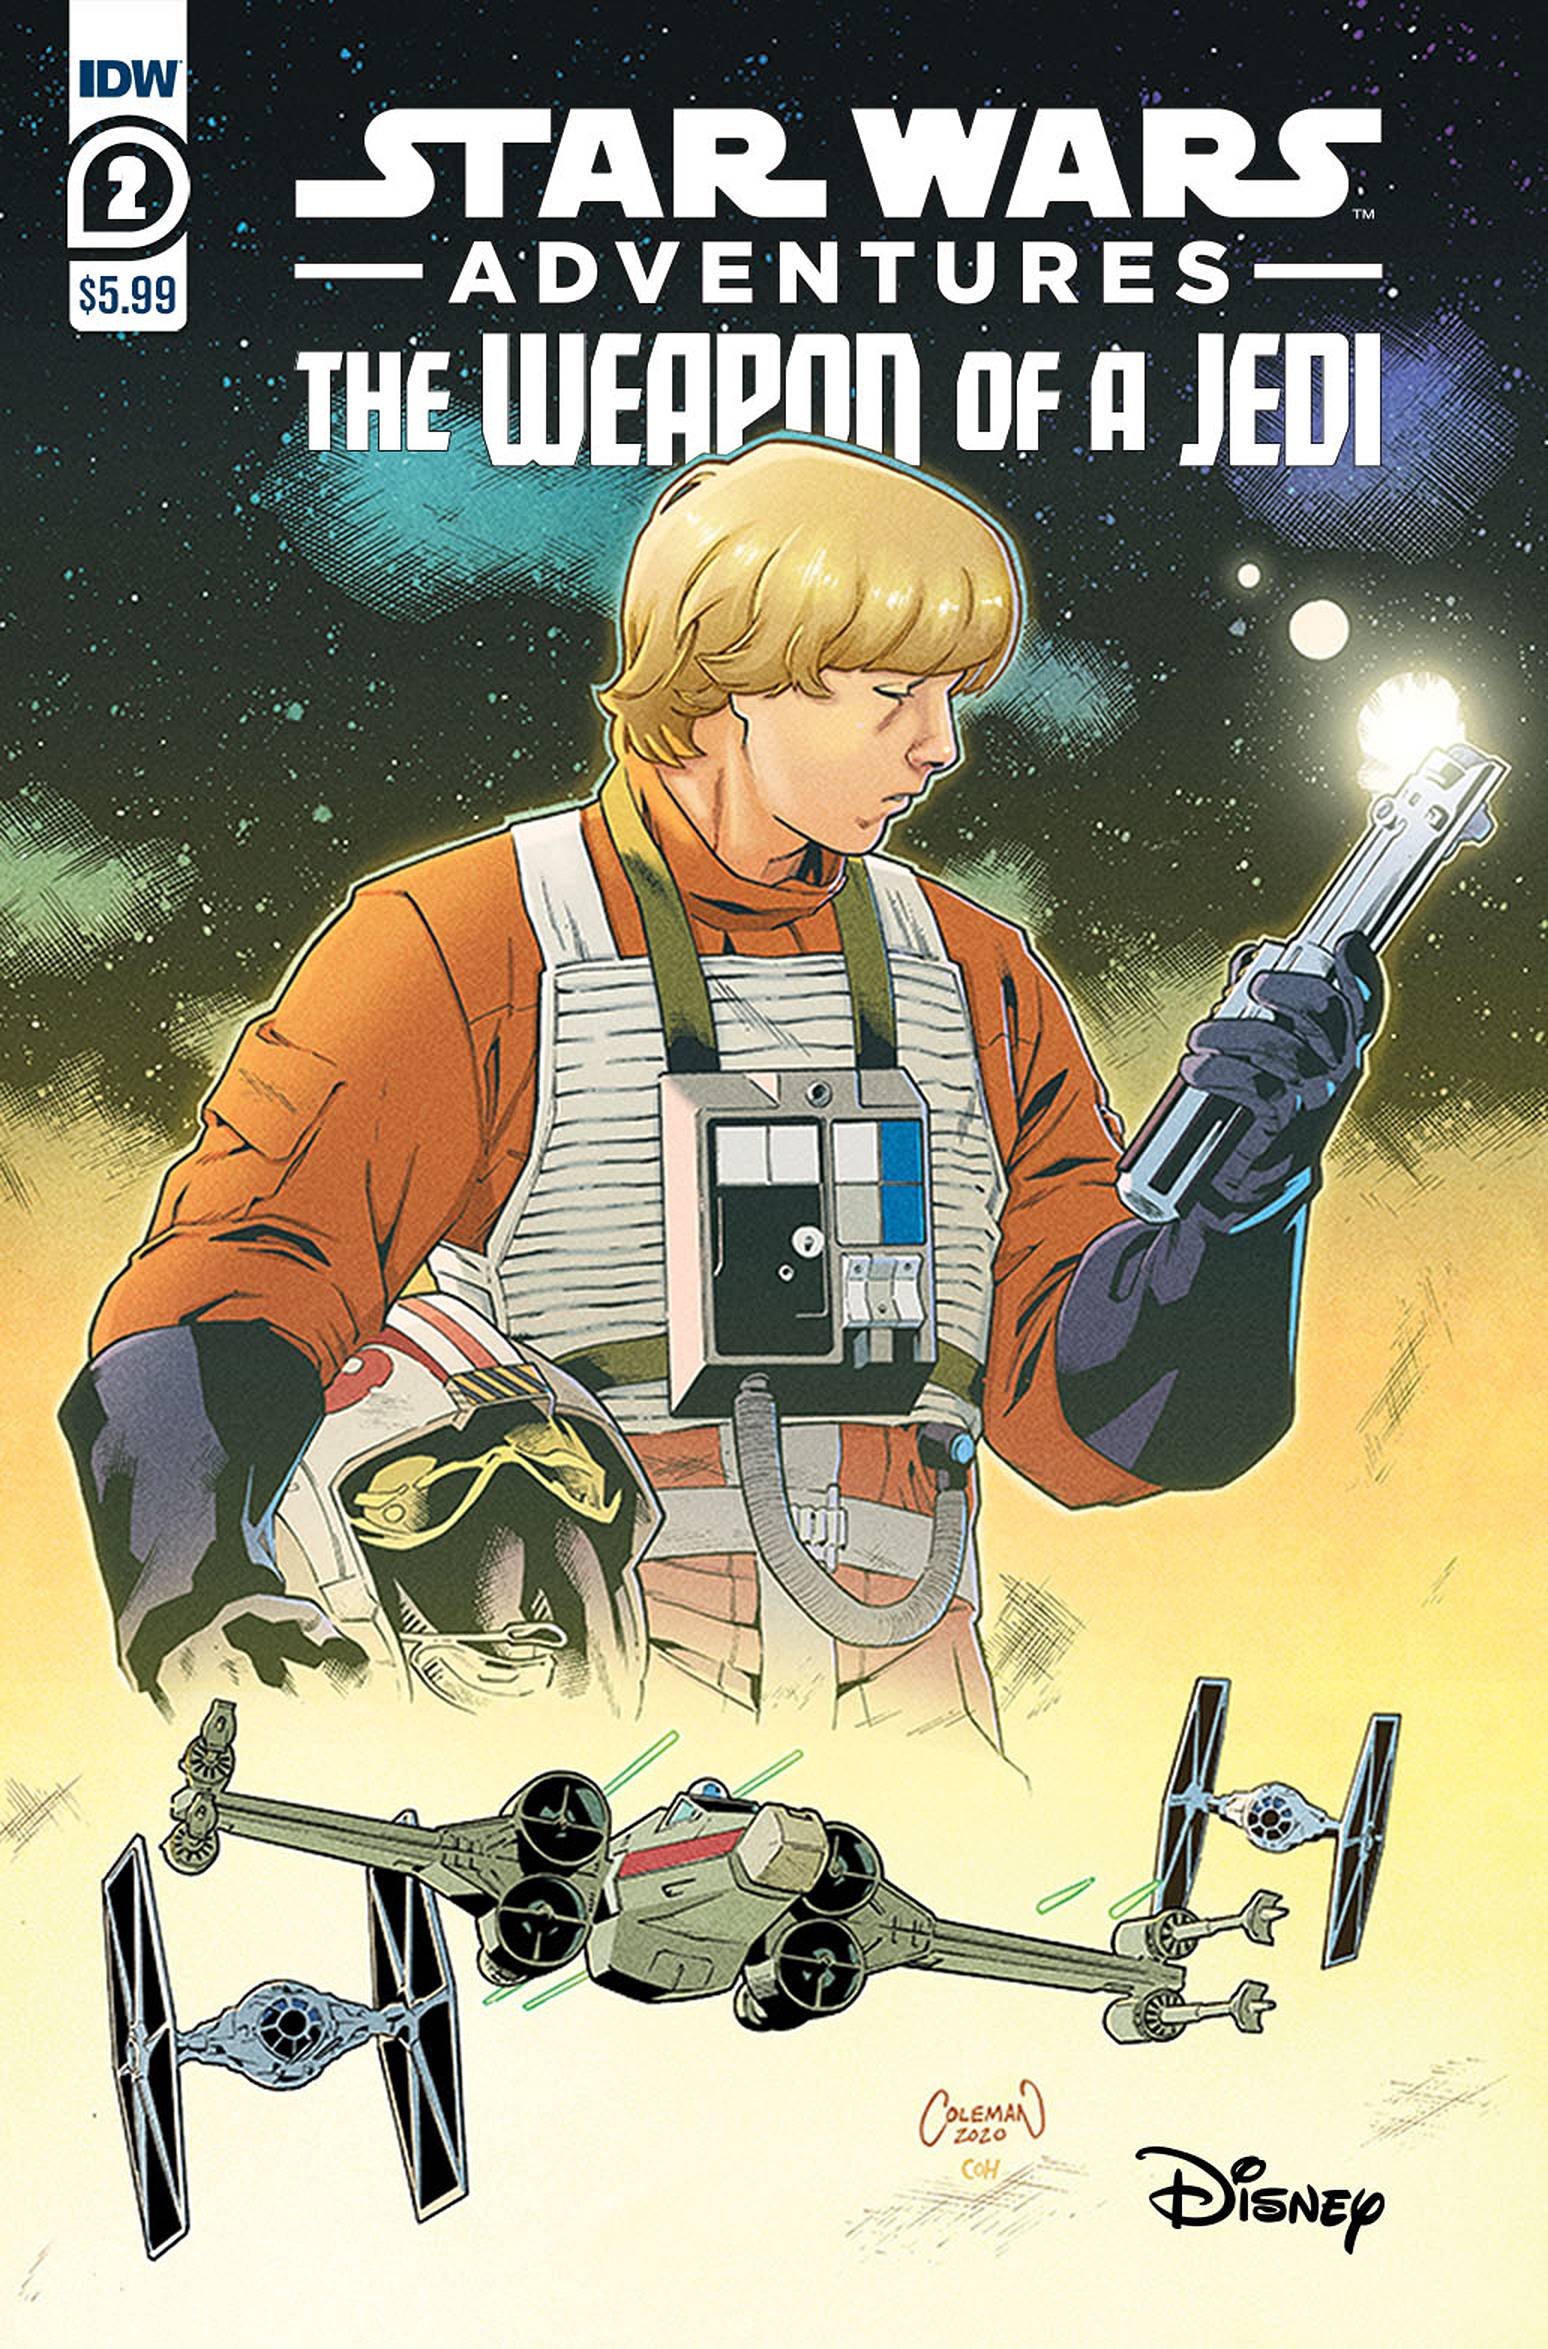 STAR WARS ADVENTURES WEAPON OF A JEDI #2 (OF 2)